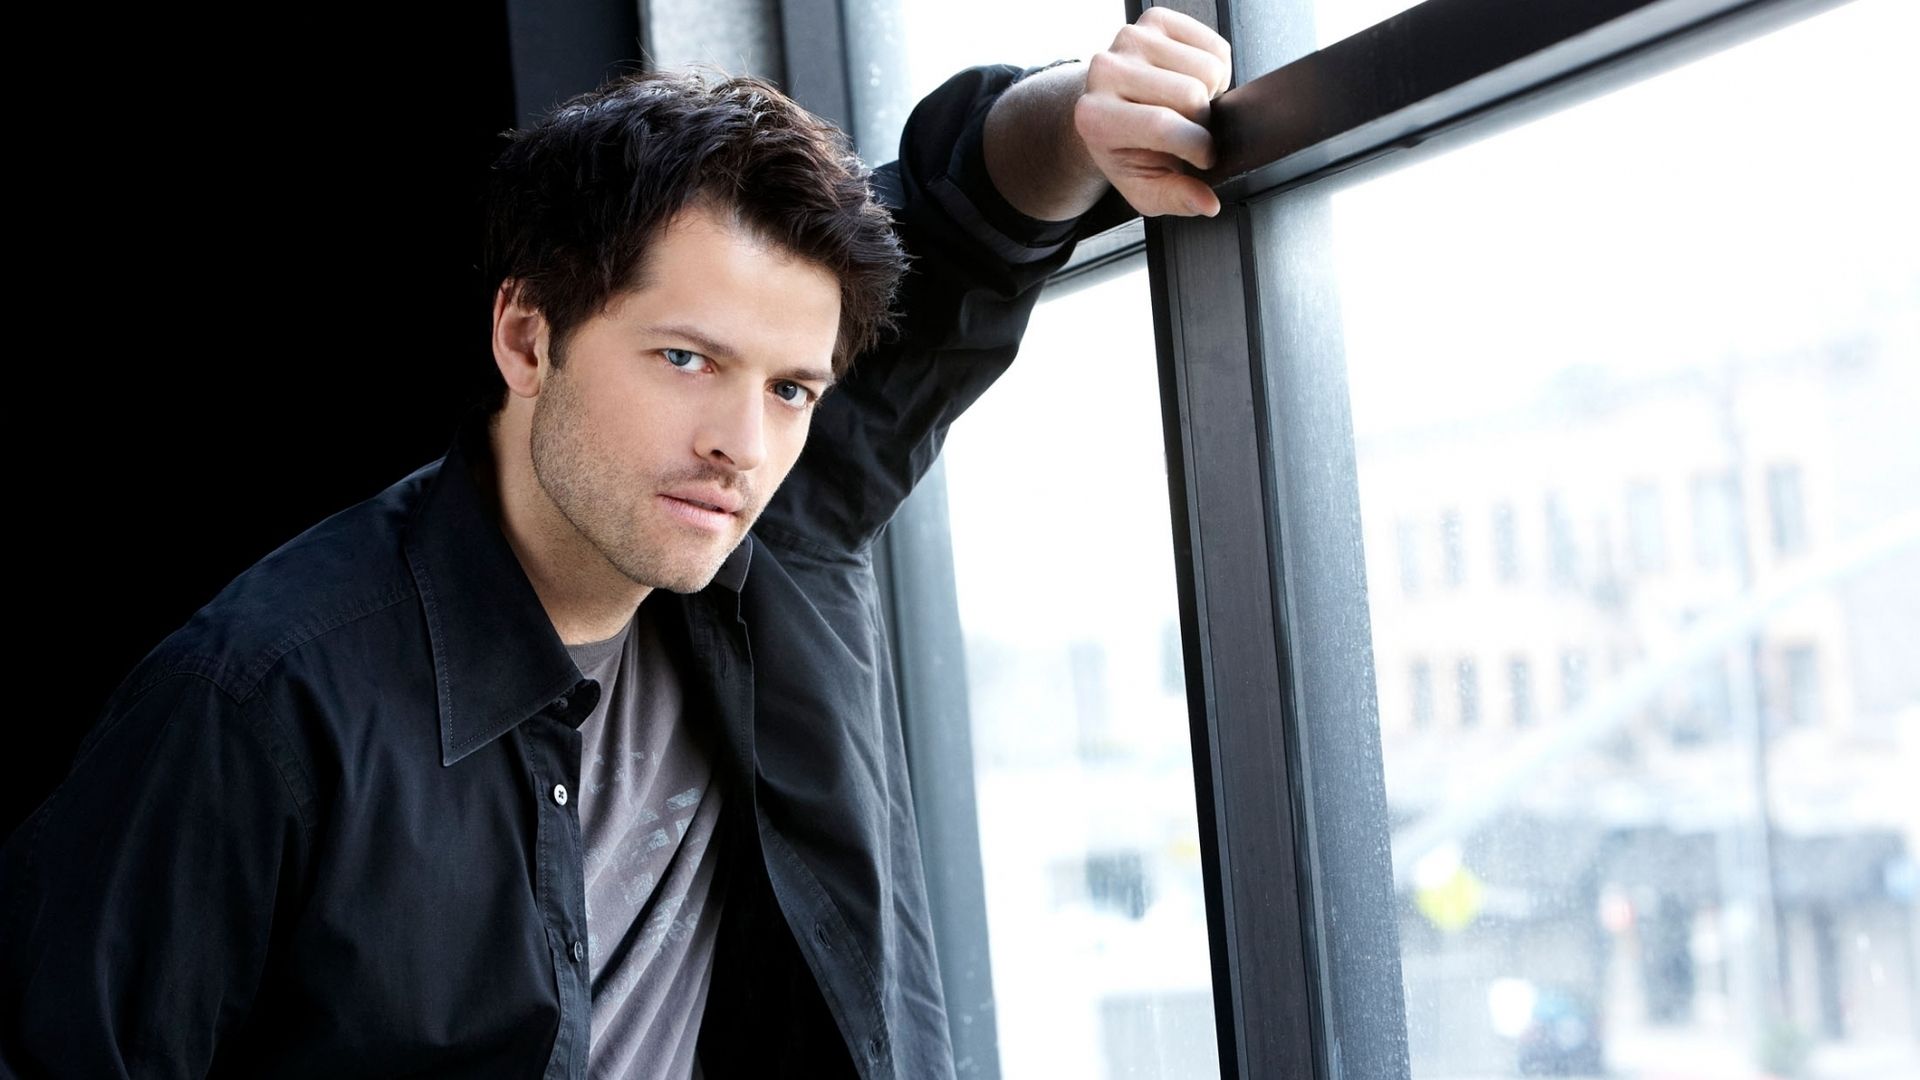 The Post Misha Collins Wallpaper Appeared First On HD Shoot